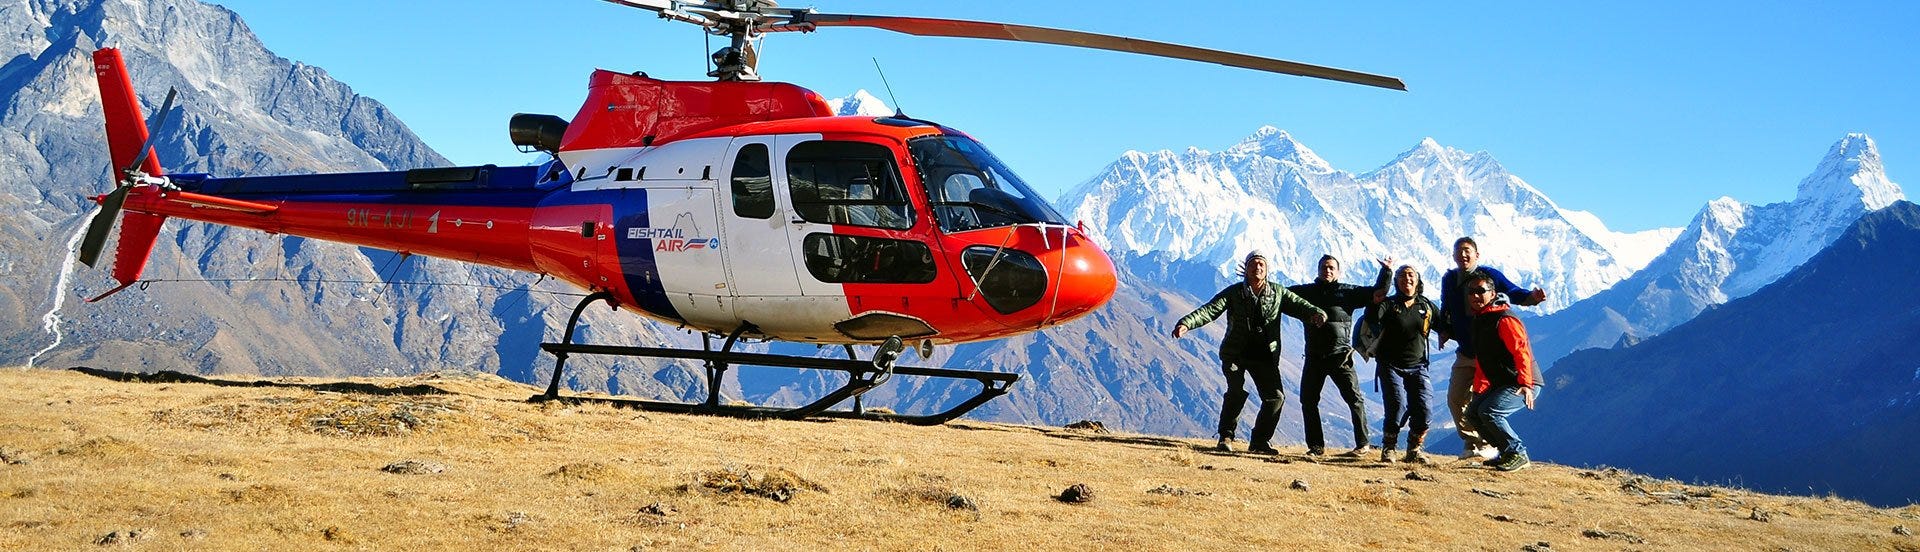 Exploring Nepal: Helicopter Tours for an Unforgettable Adventure